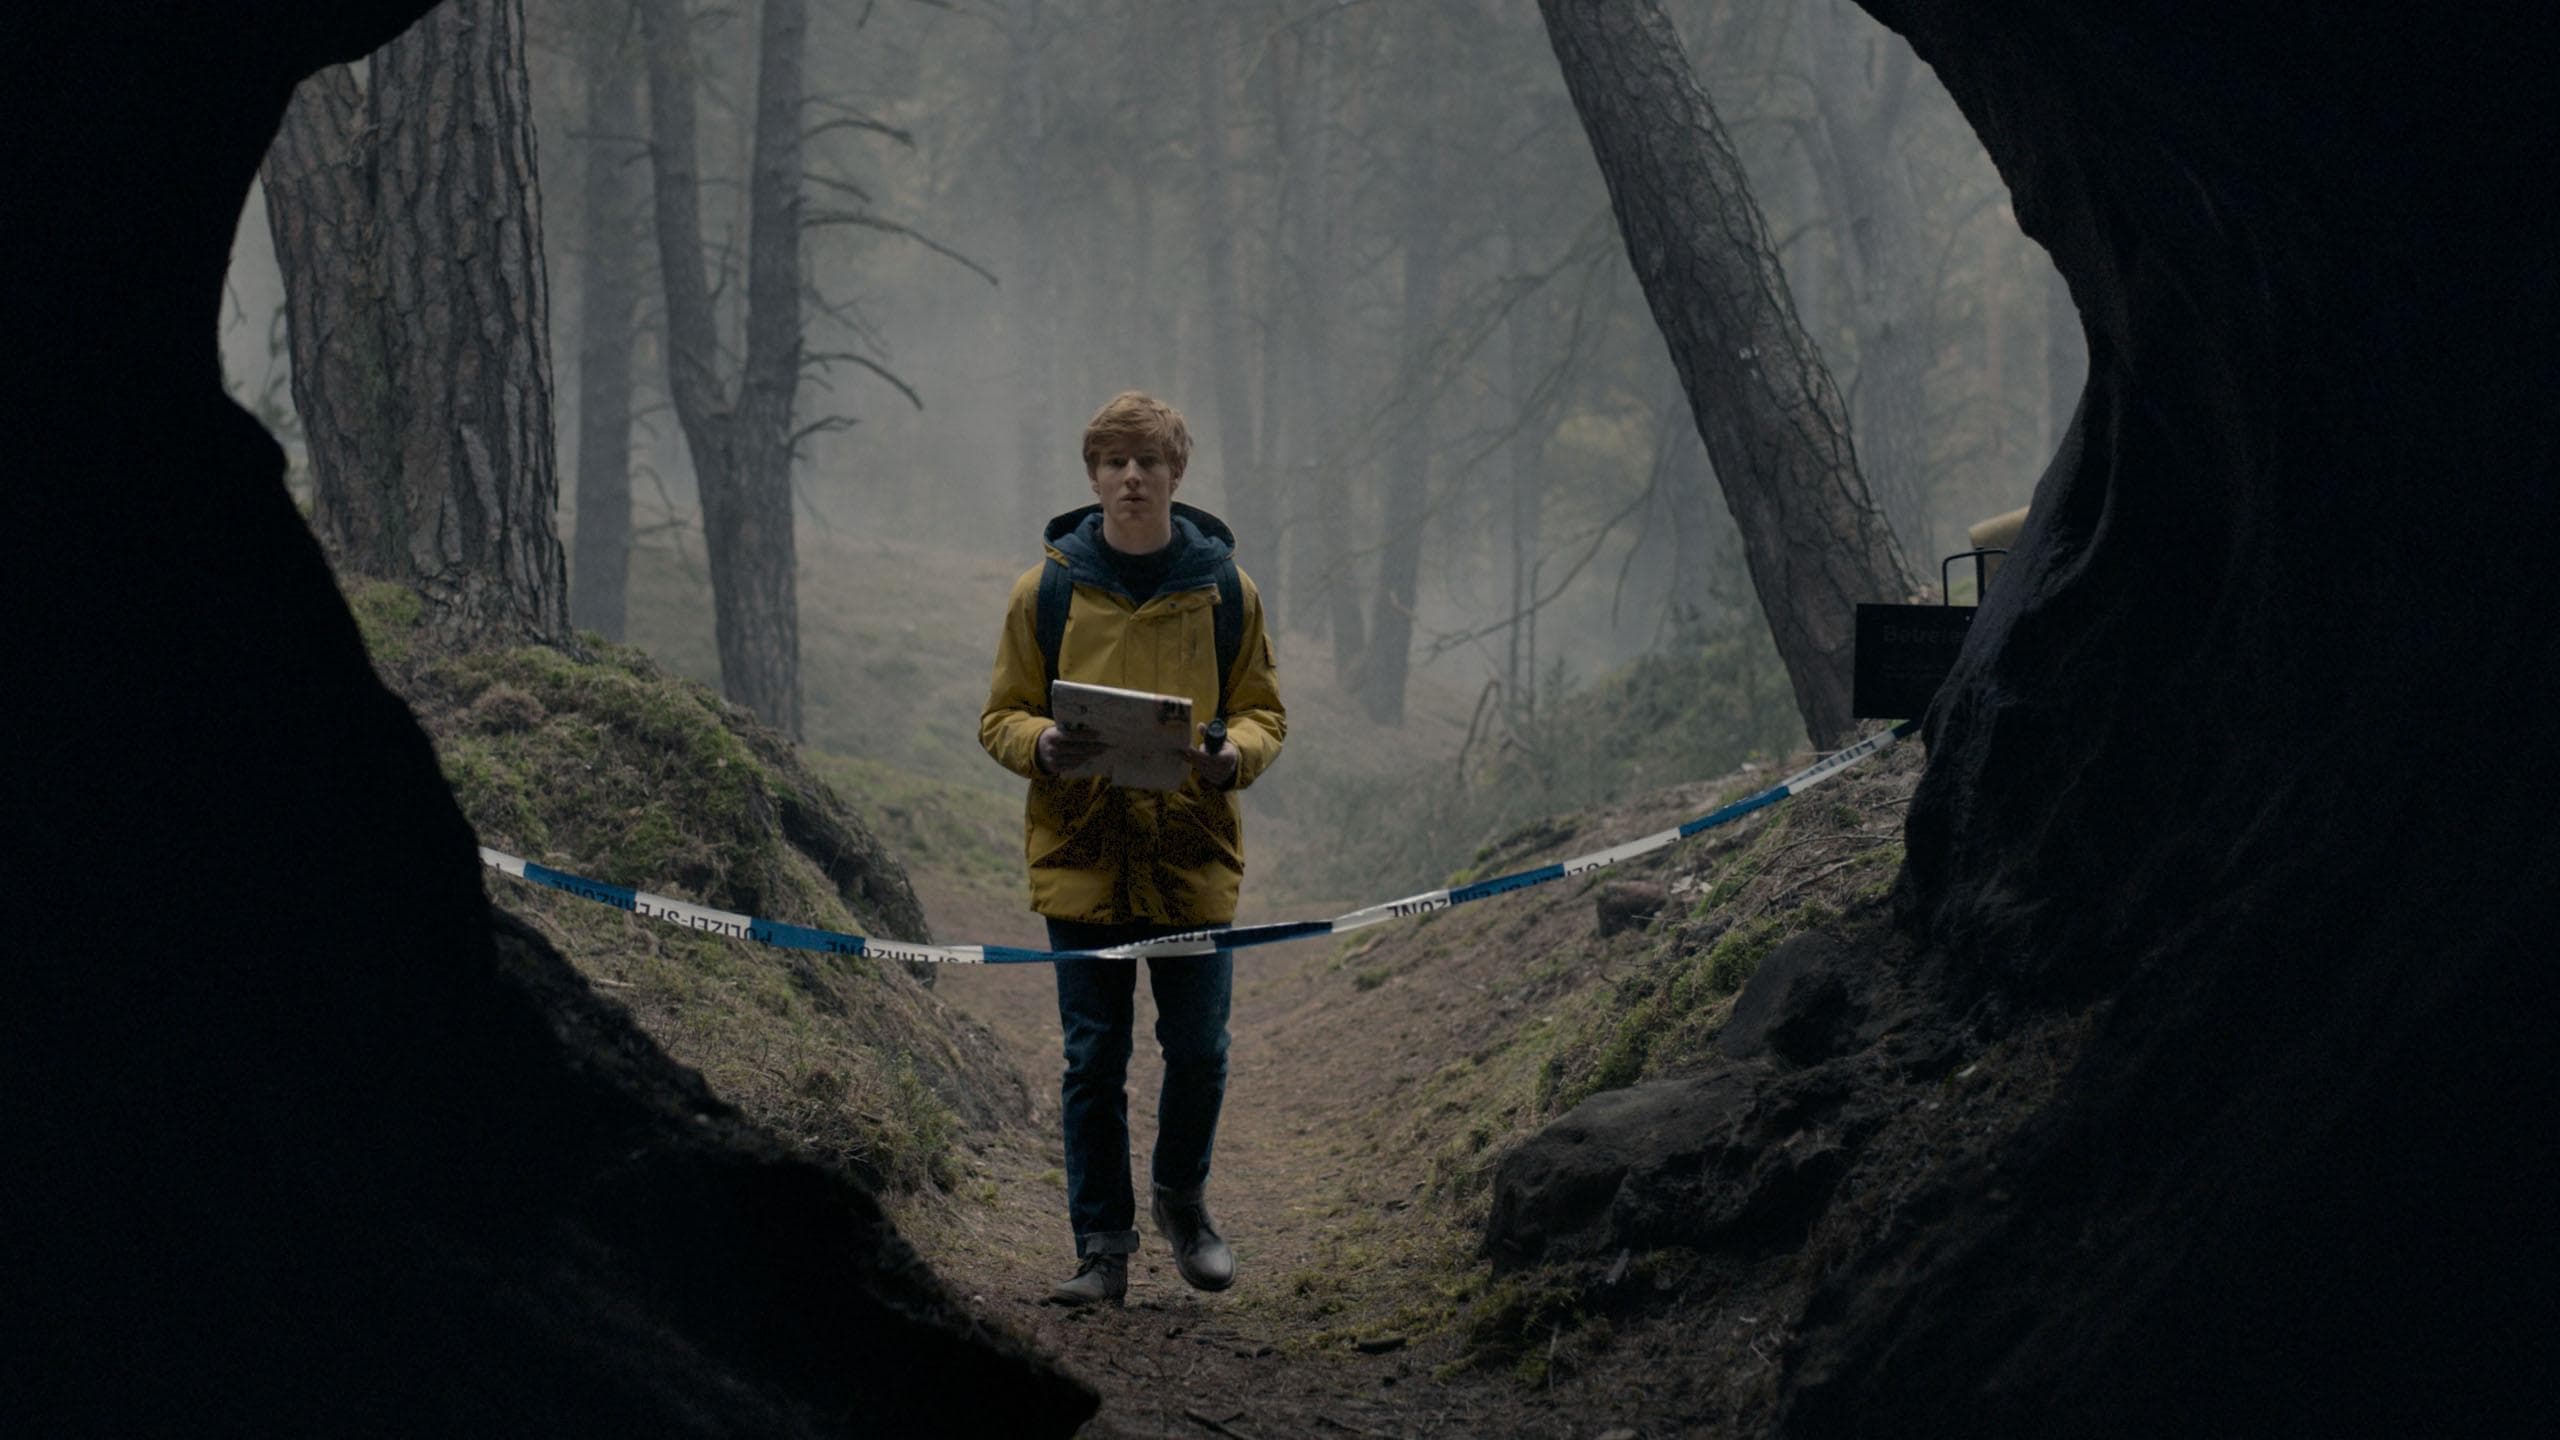 Jonas Kahnwald (Louis Hofmann) stands in the cave wearing the yellow jacket from “Dark“. <small>© Netflix</small>